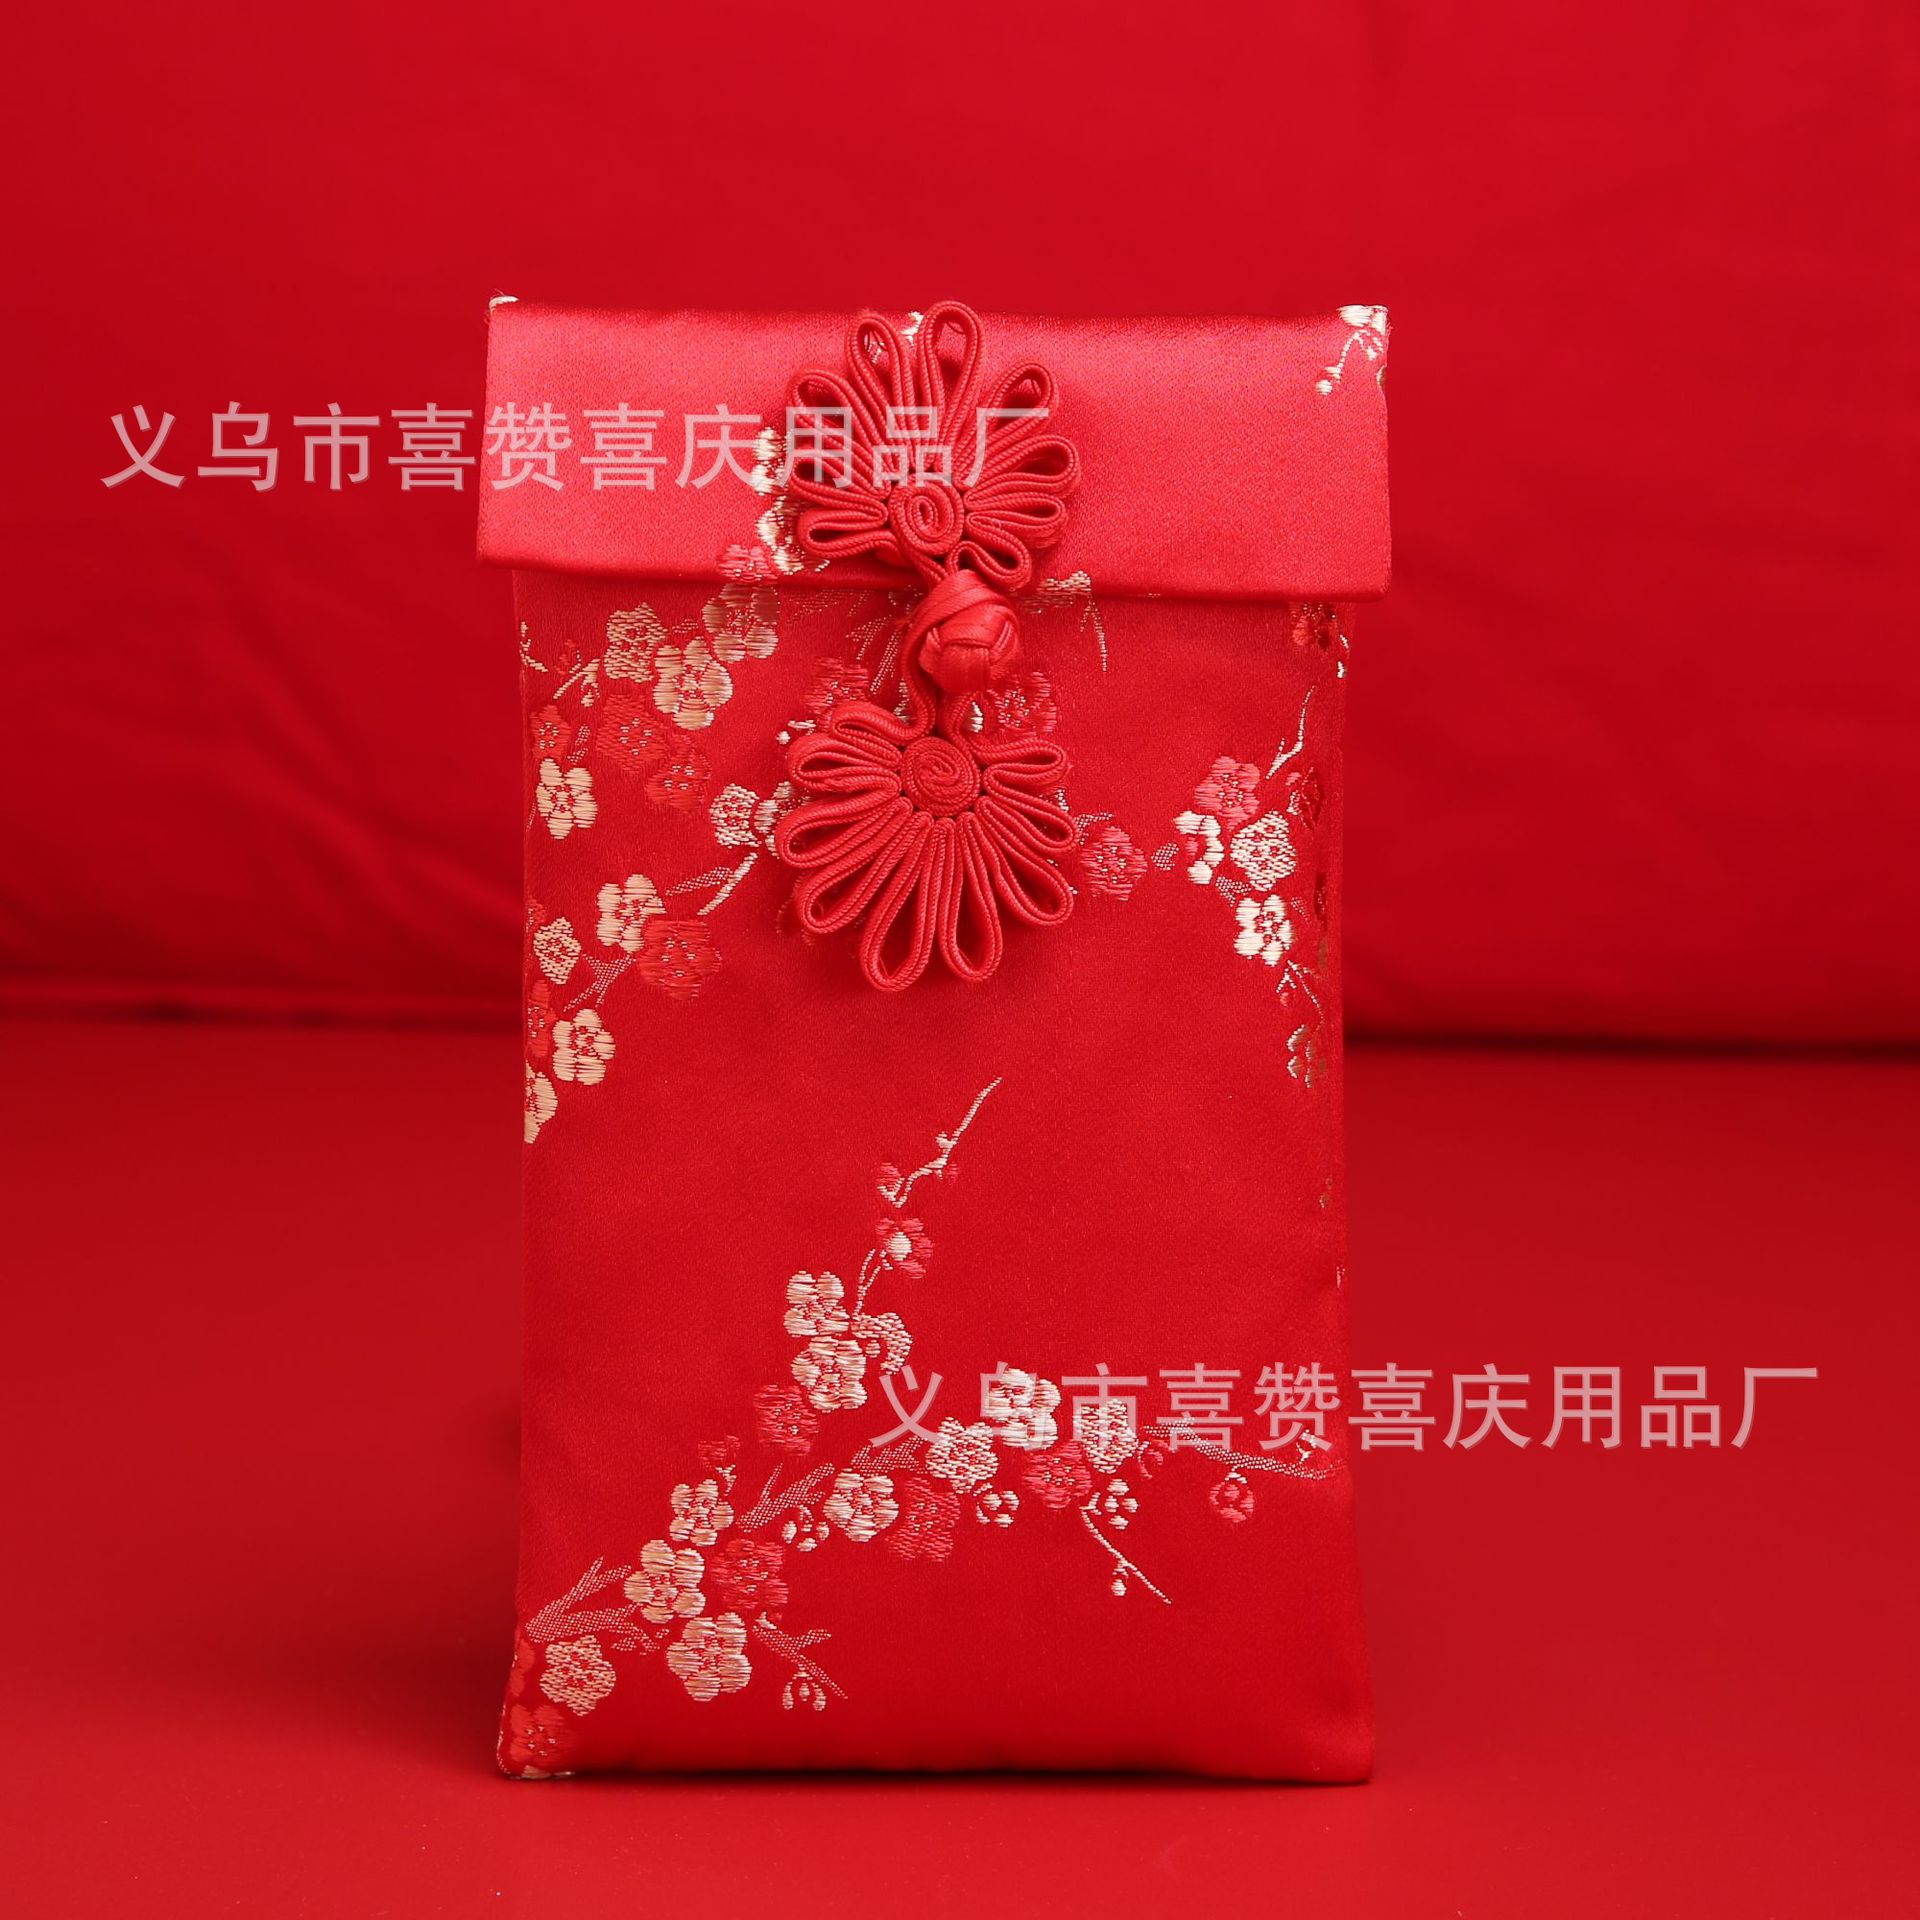 Wedding Modified Fabric Chinese Red Envelope Wedding Gift Gift Gift Seal Large Ten Thousand Yuan Creative Personality Red Envelope Large